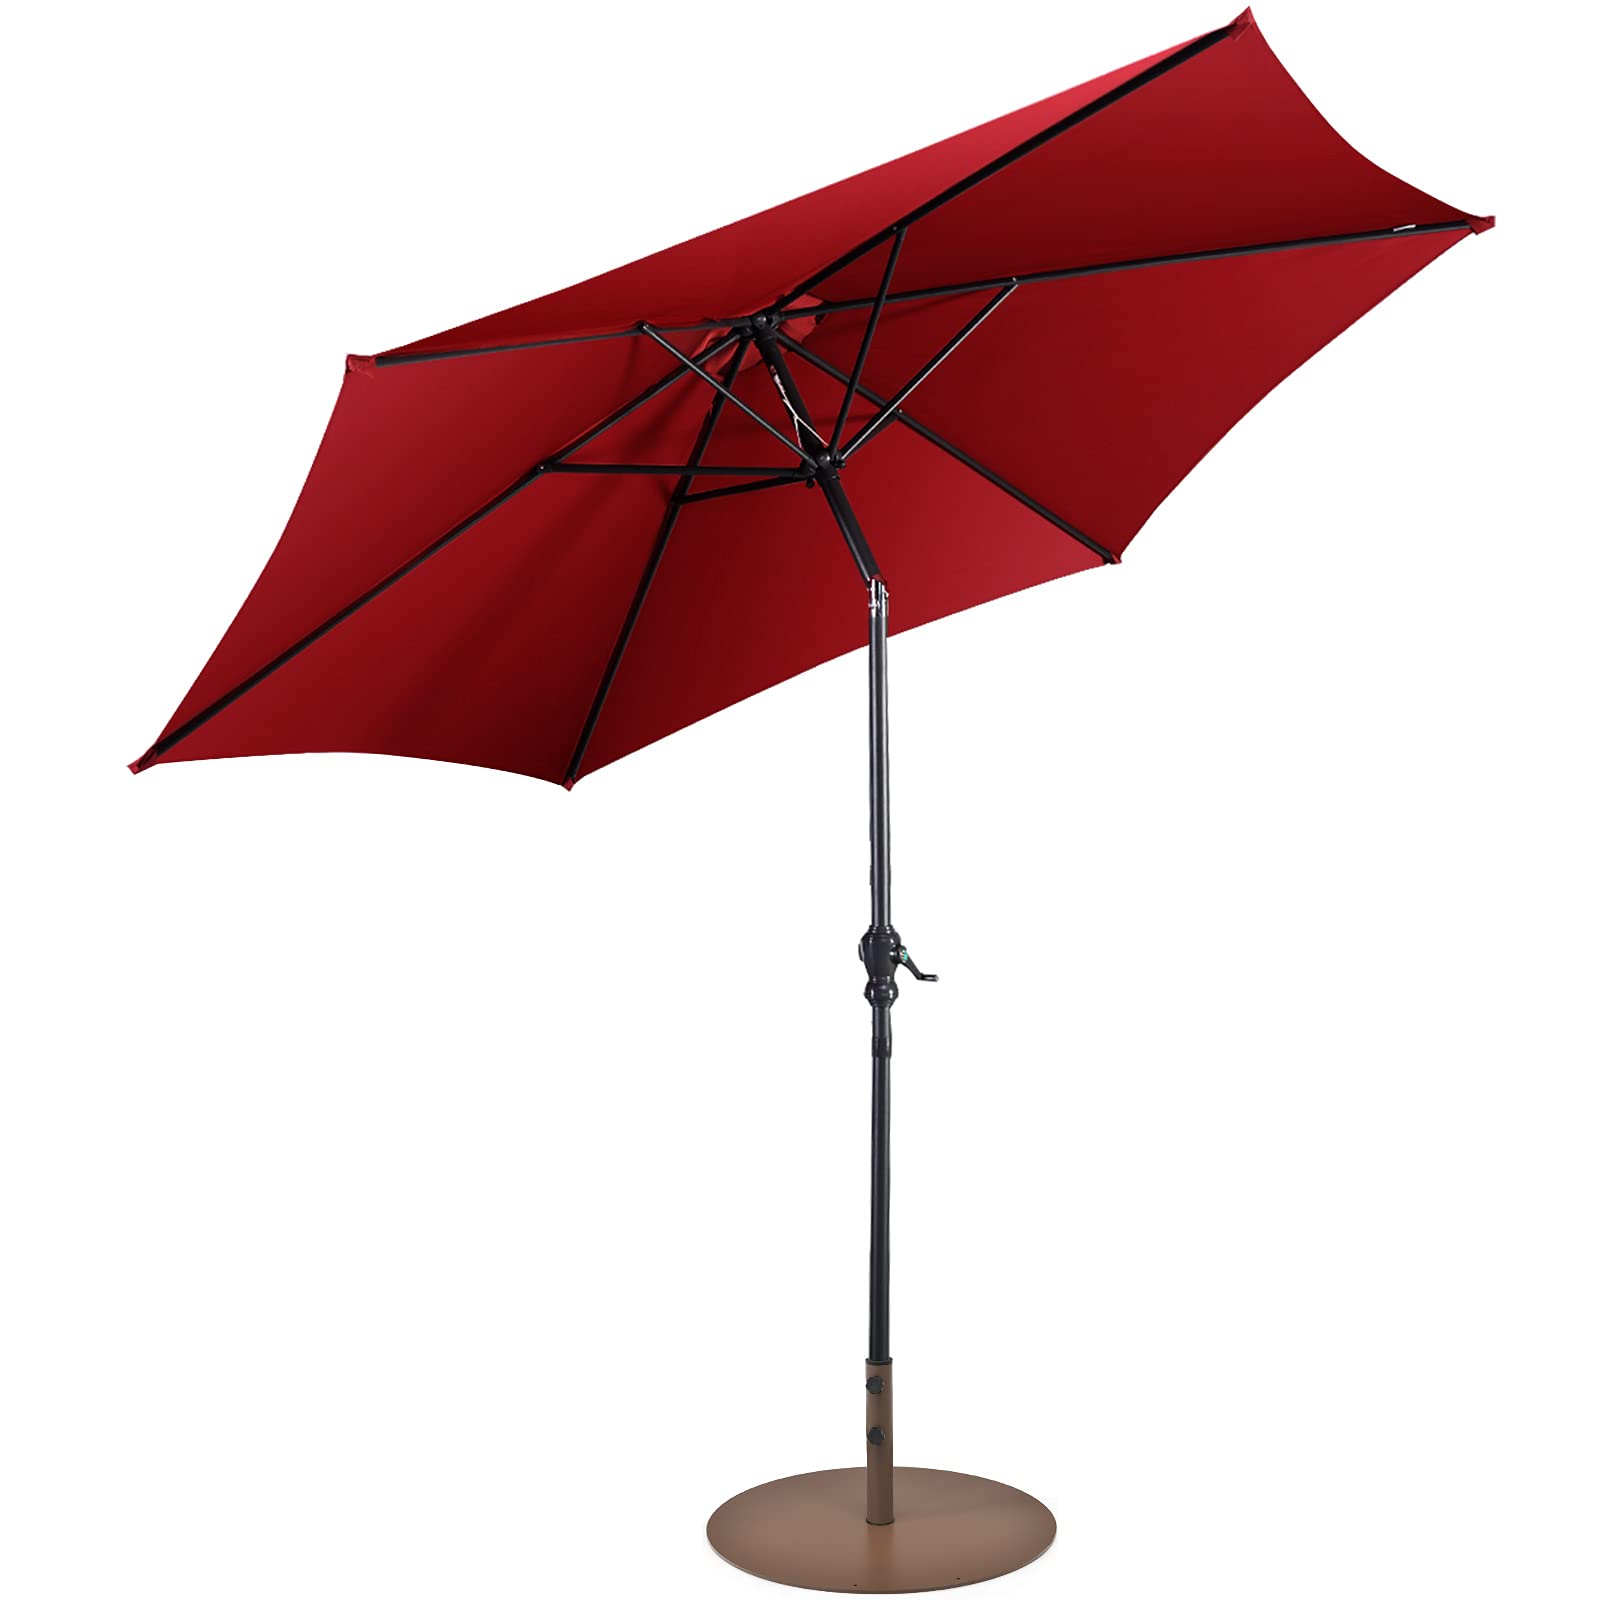 Giantex Patio Umbrella with Base Stand, 10ft Market Umbrella with 59 LBS Heavy-Duty Round Umbrella Stand